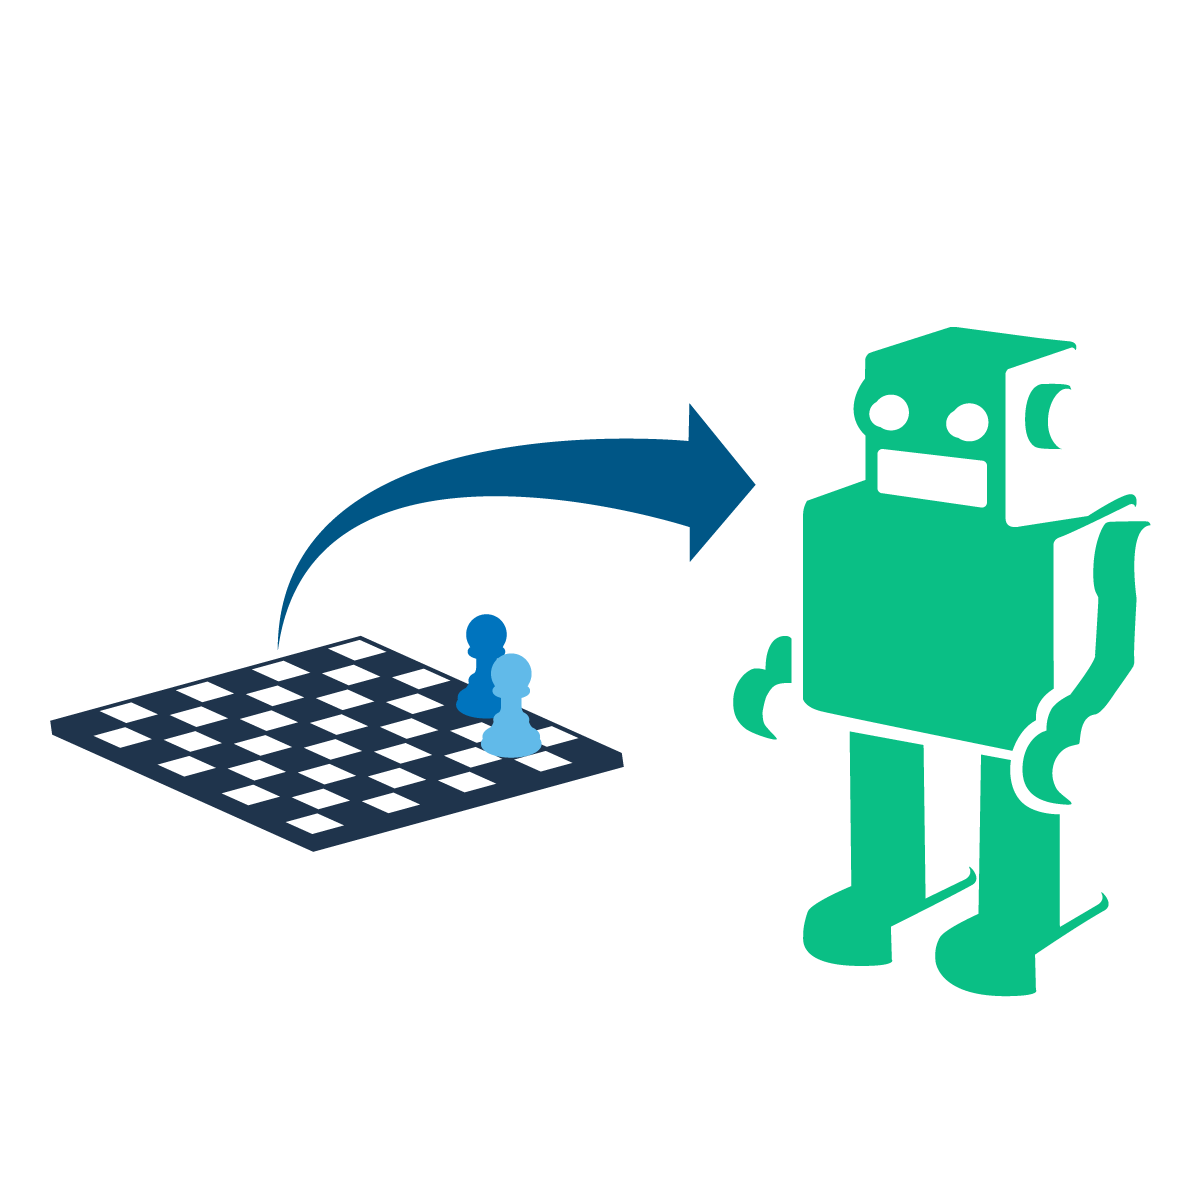 Chess board and robot graphic